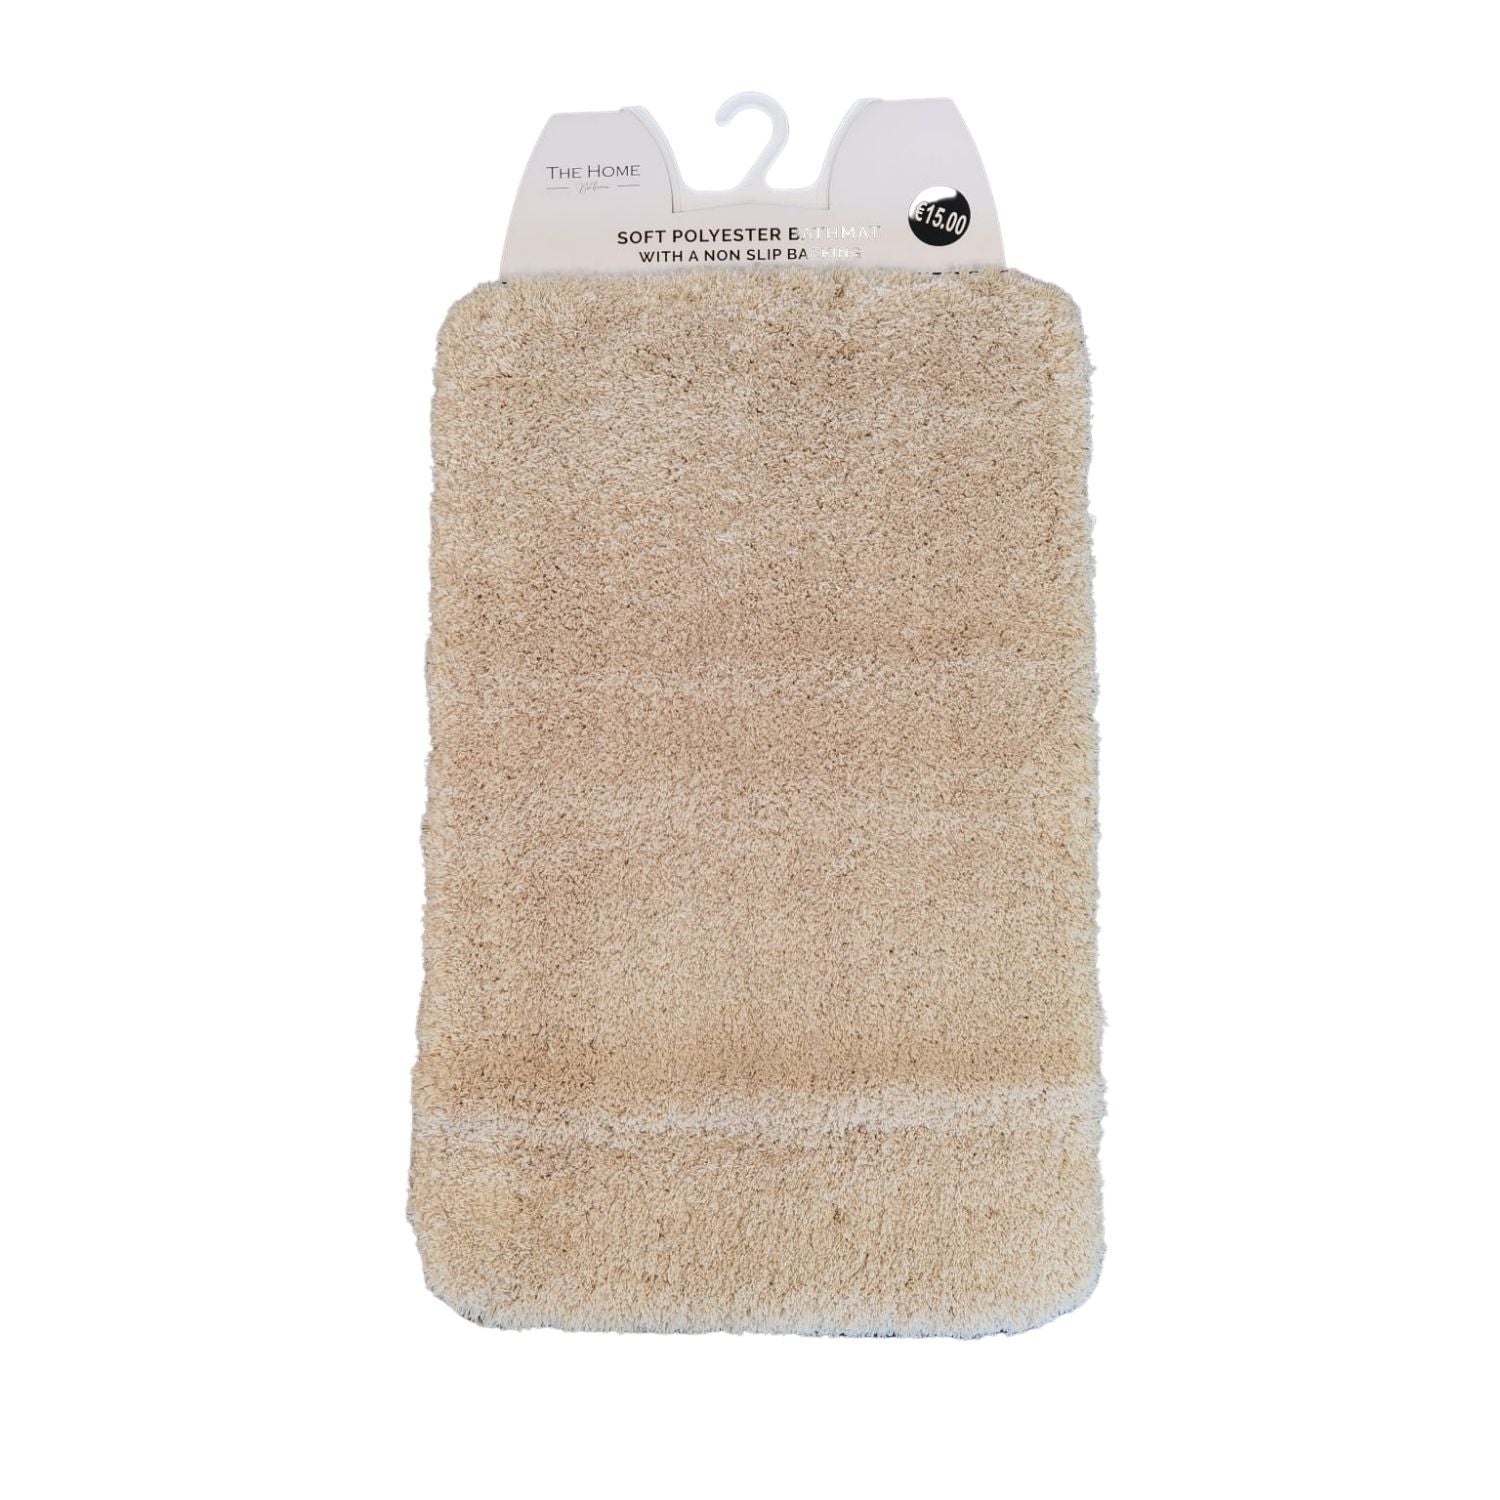 The Home Bathroom Soft Polyester Bath Mat - Beige 2 Shaws Department Stores